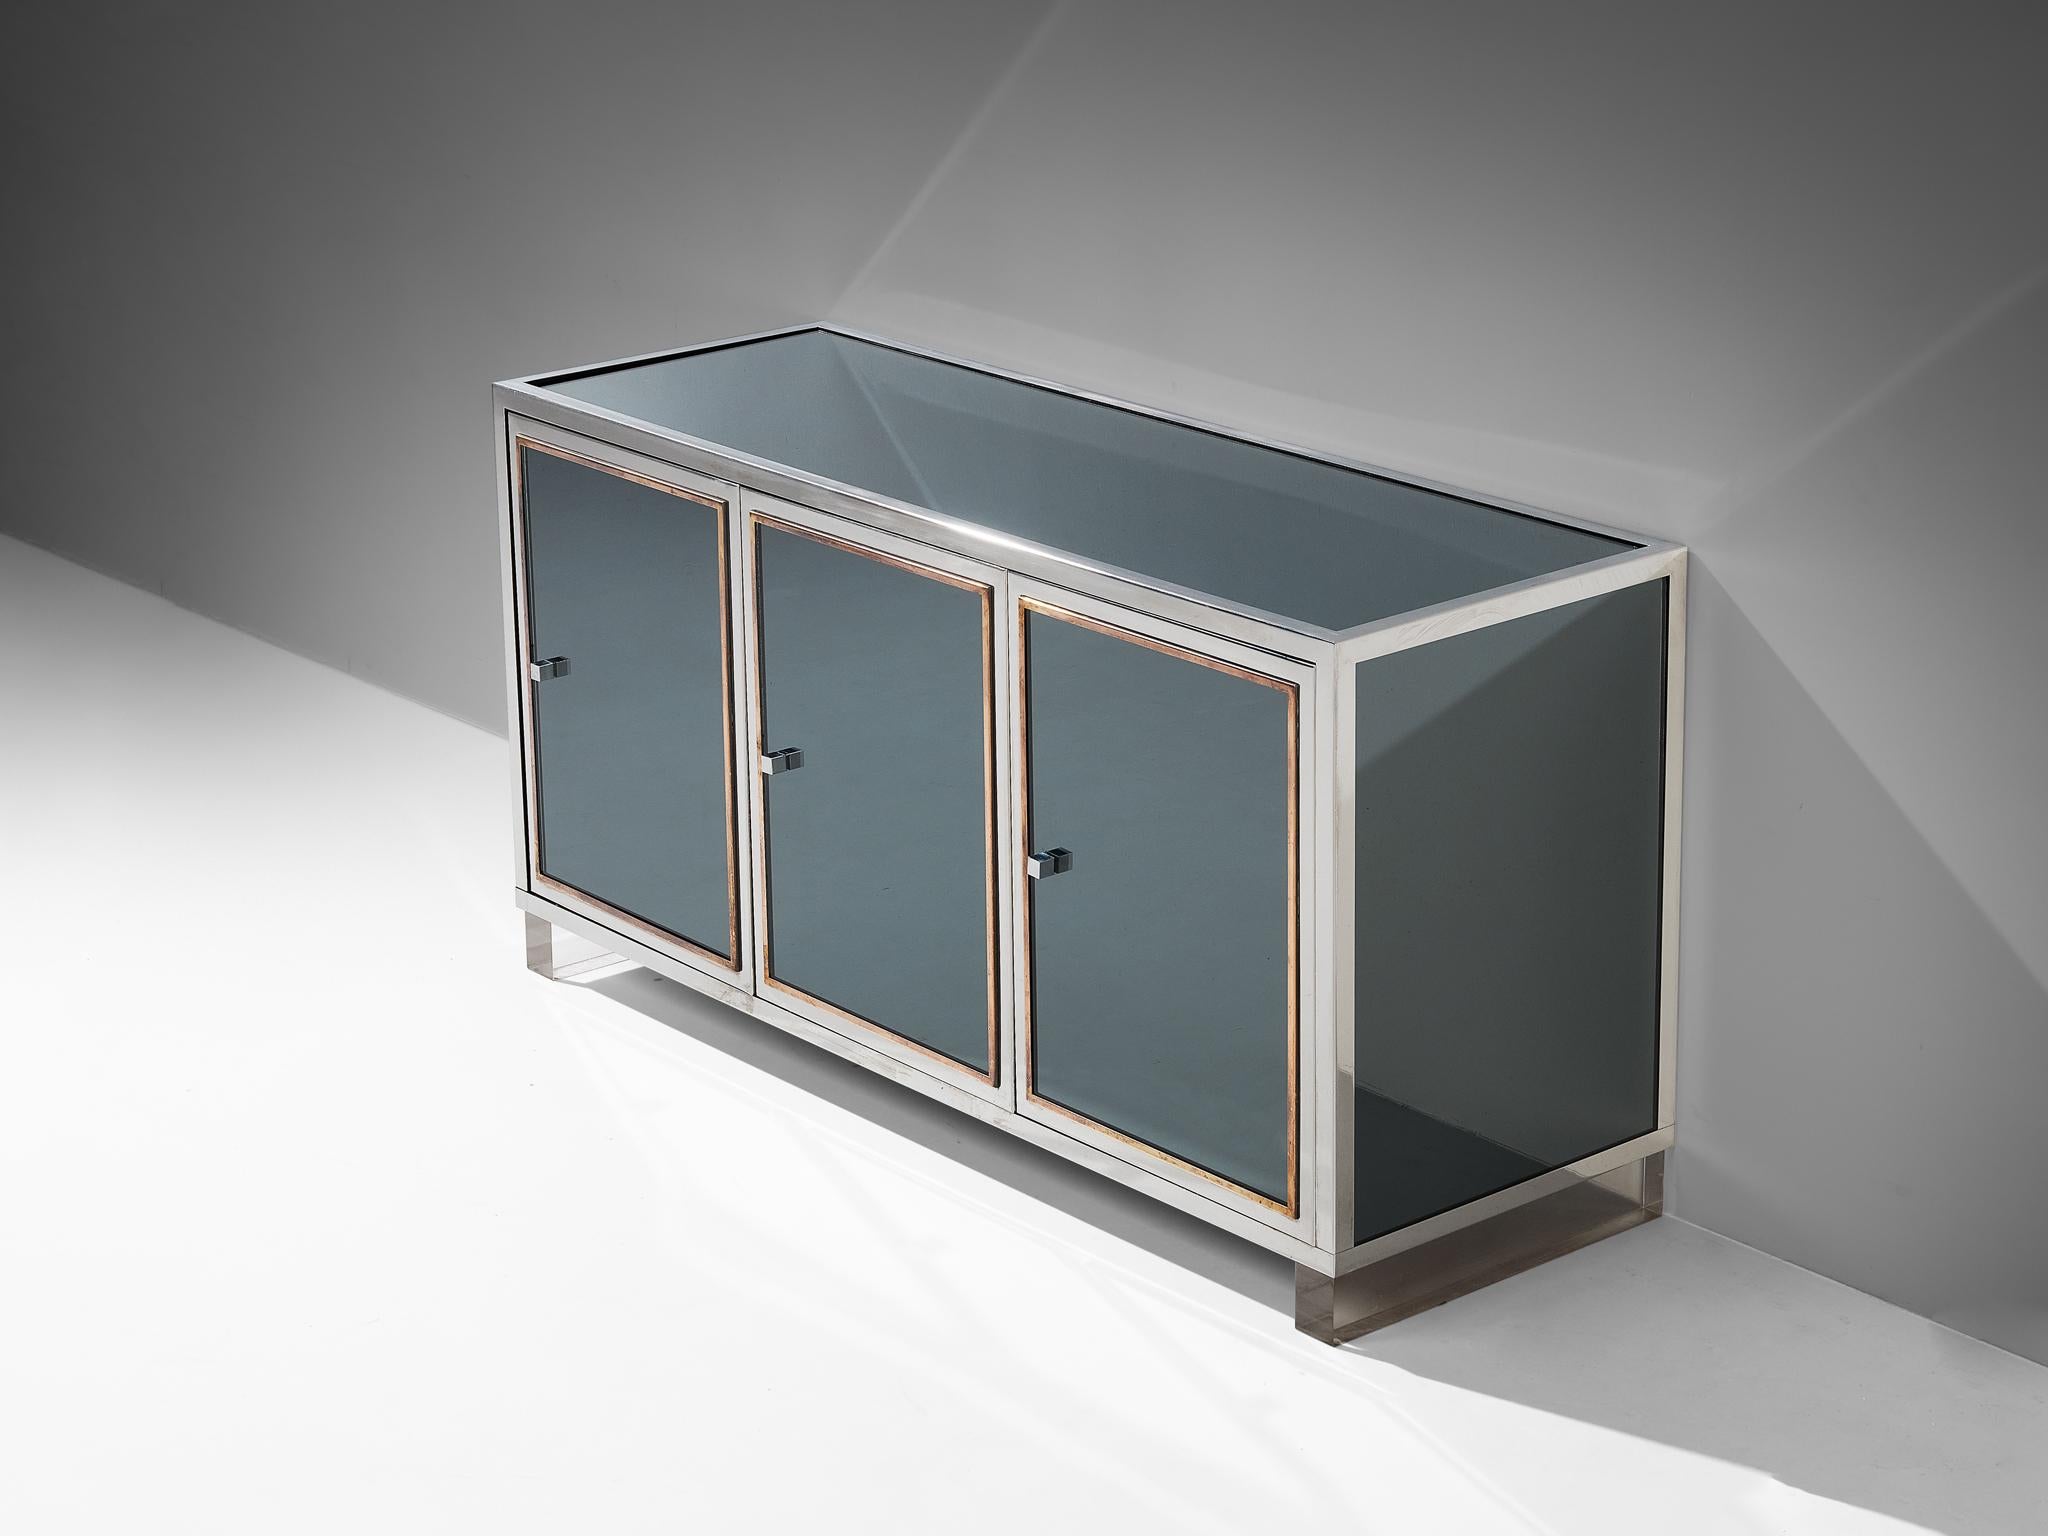 Michel Pigneres, sideboard, brass, chrome-plated steel, mirror, France, 1960s

This exquisite sideboard is beautifully designed by Michel Pigneres in the 1960s. It is featuring a nice structure of sharp lines and geometrical shapes. This item is